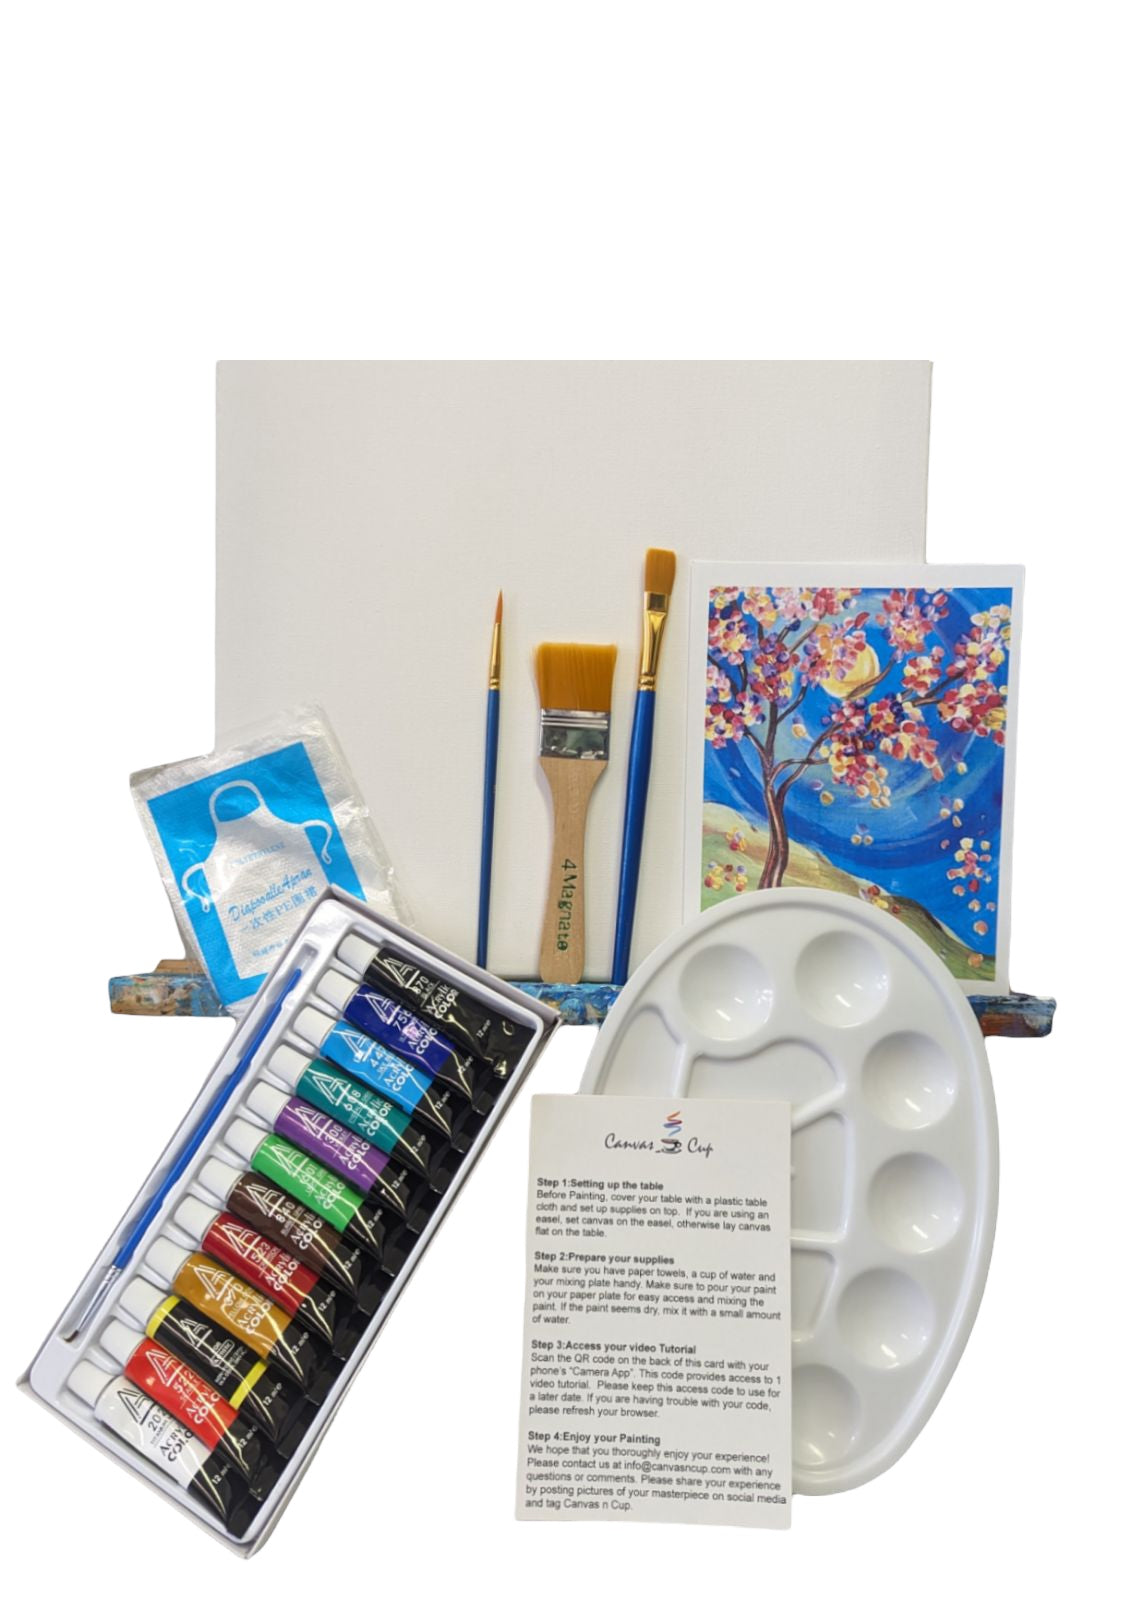 Paint and Sip Kits at Home & Video Lesson, Paint Party, Painting Kit, Sip  and Paint, DIY Crafts, Paint By Number, Home Decor